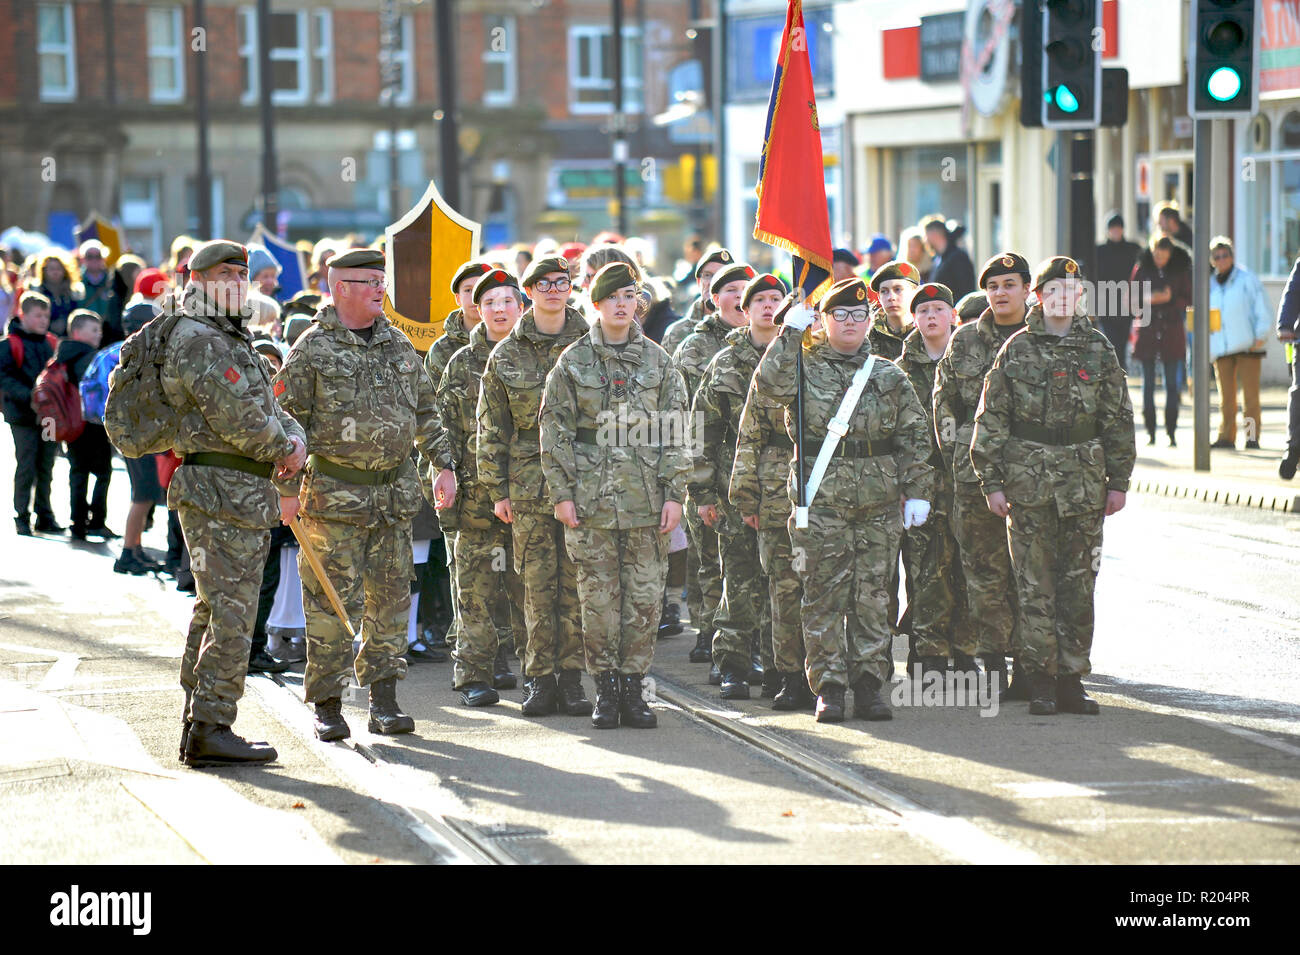 Members of the army cadet force taking part in the Fleetwood home coming parade commemorating the end of hostilities in the first world war Stock Photo